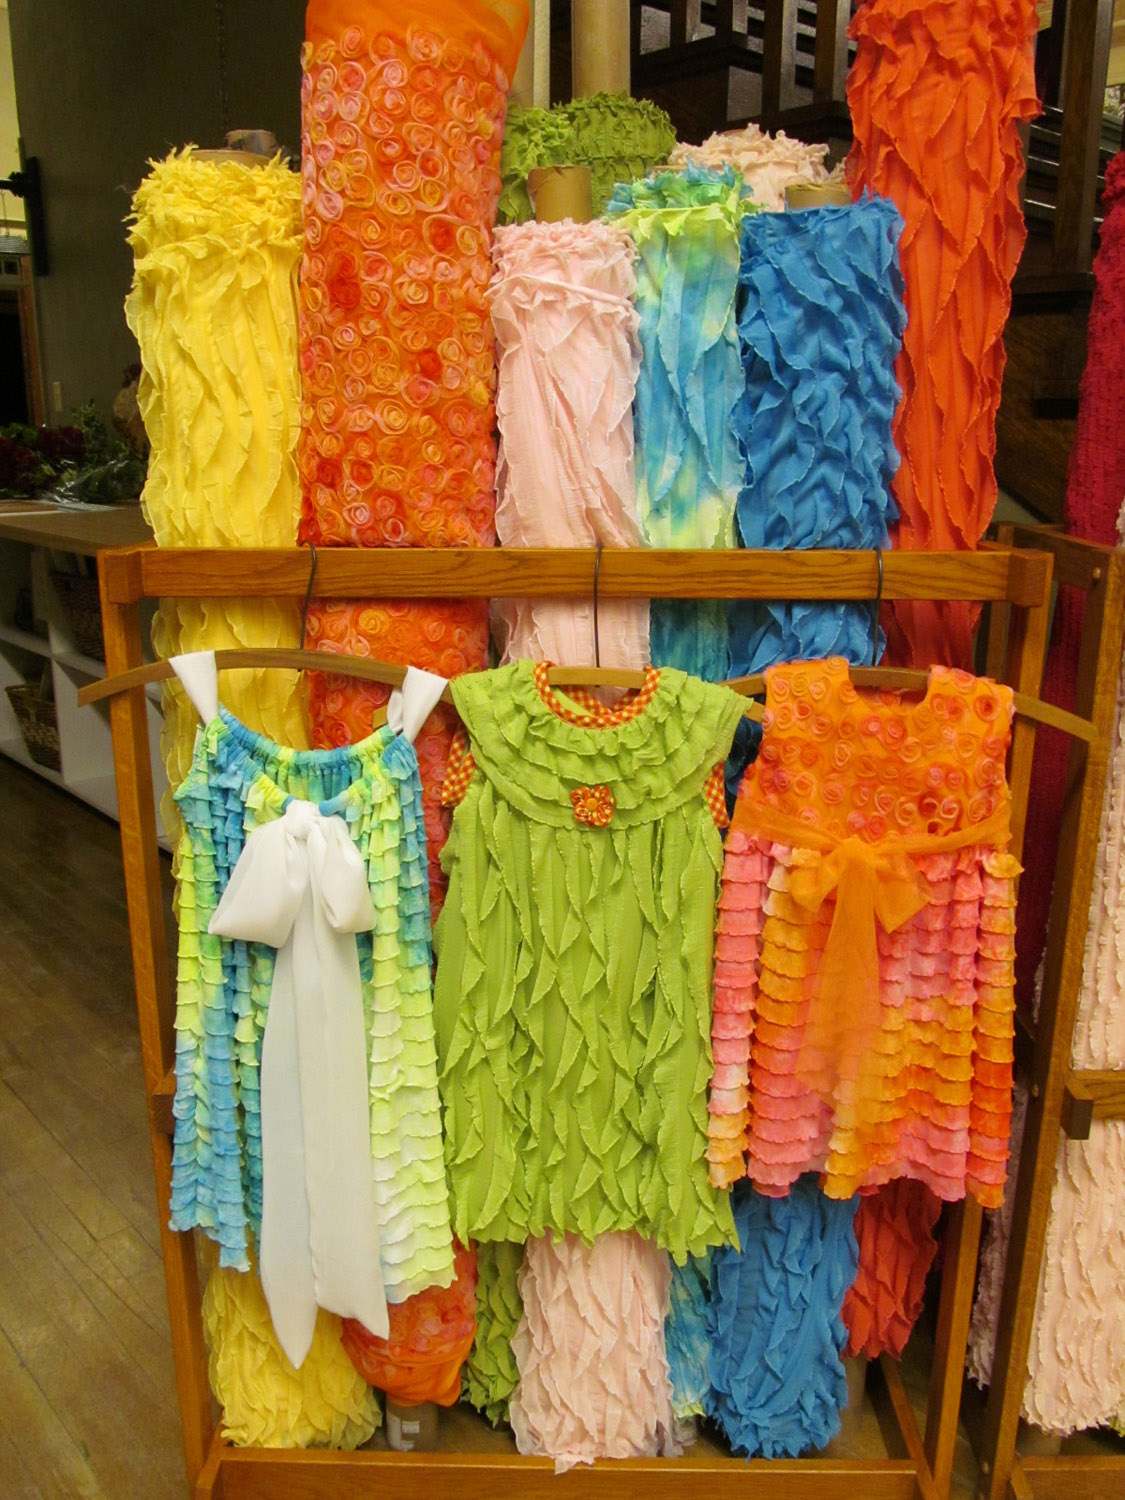 several colorful ones of clothes on display next to each other